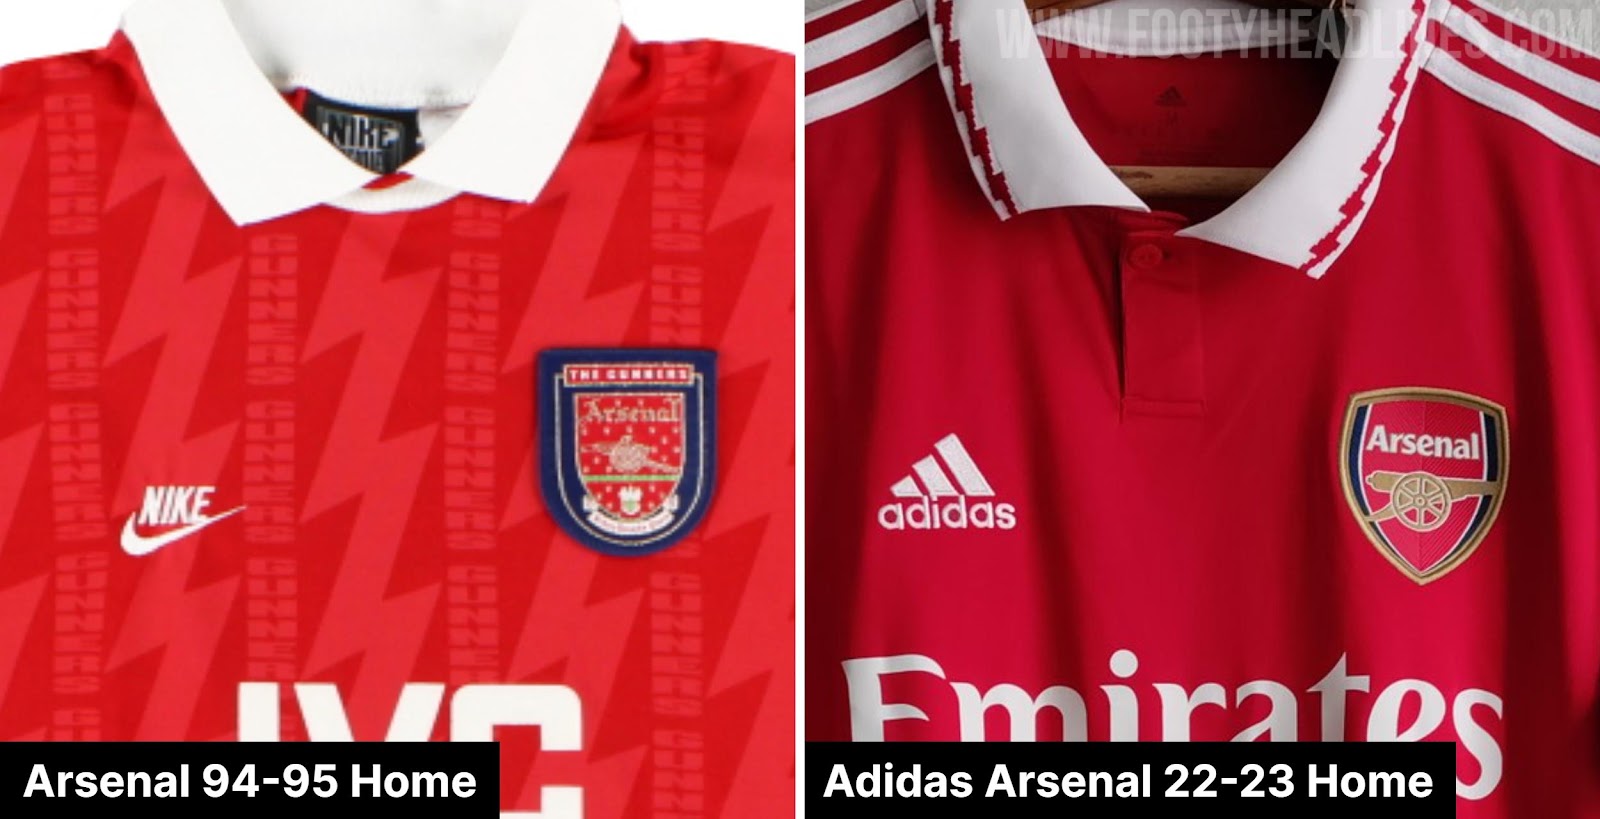 It's Not Nike 18-19 AS Roma: What Inspired Arsenal 22-23 Home Kit - Footy Headlines